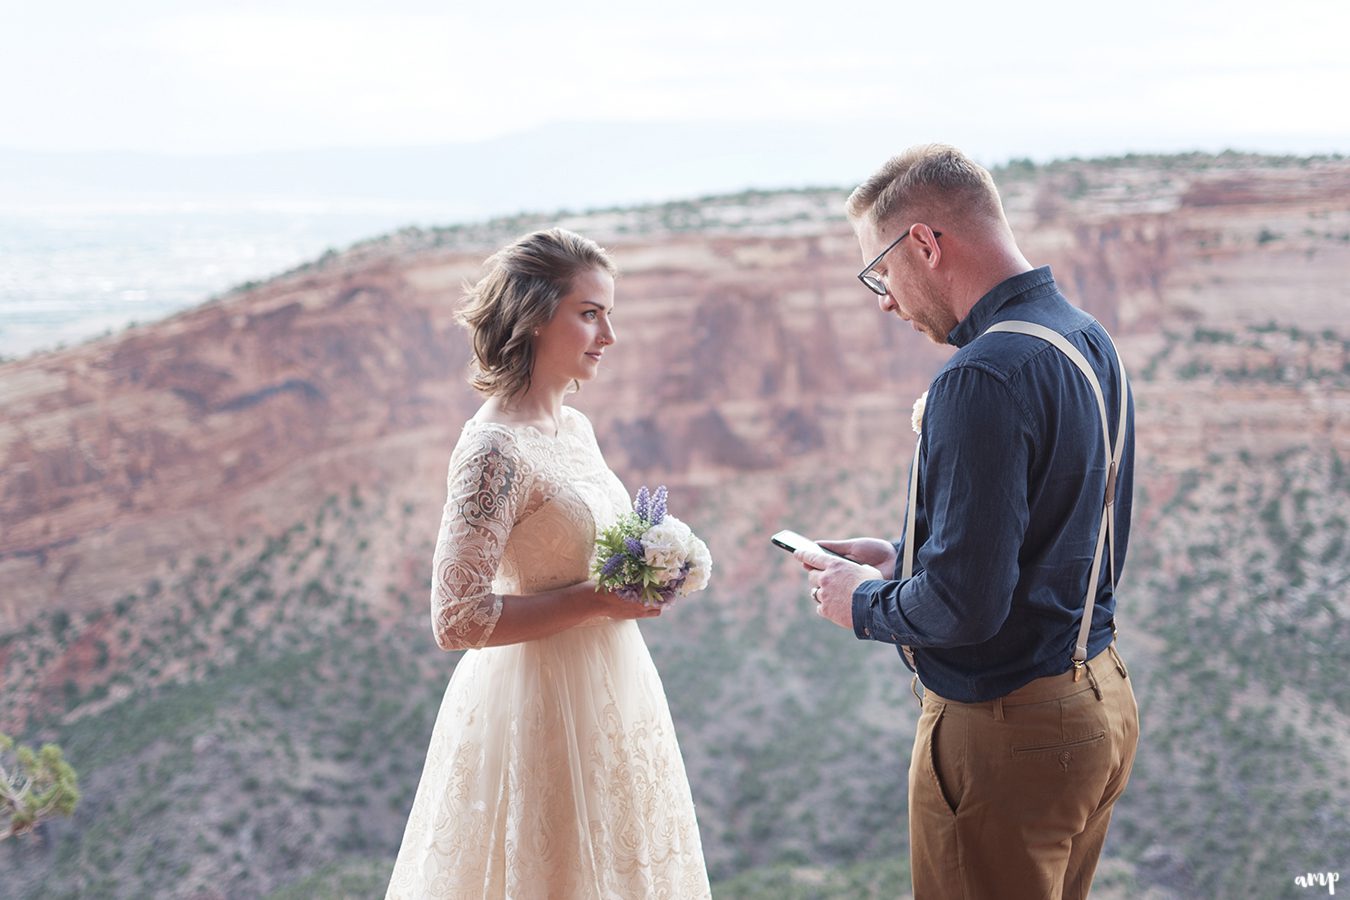 Bride and Groom share vows during their Elopement on the Colorado National Monument, Grand Junction CO | amanda.matilda.photography